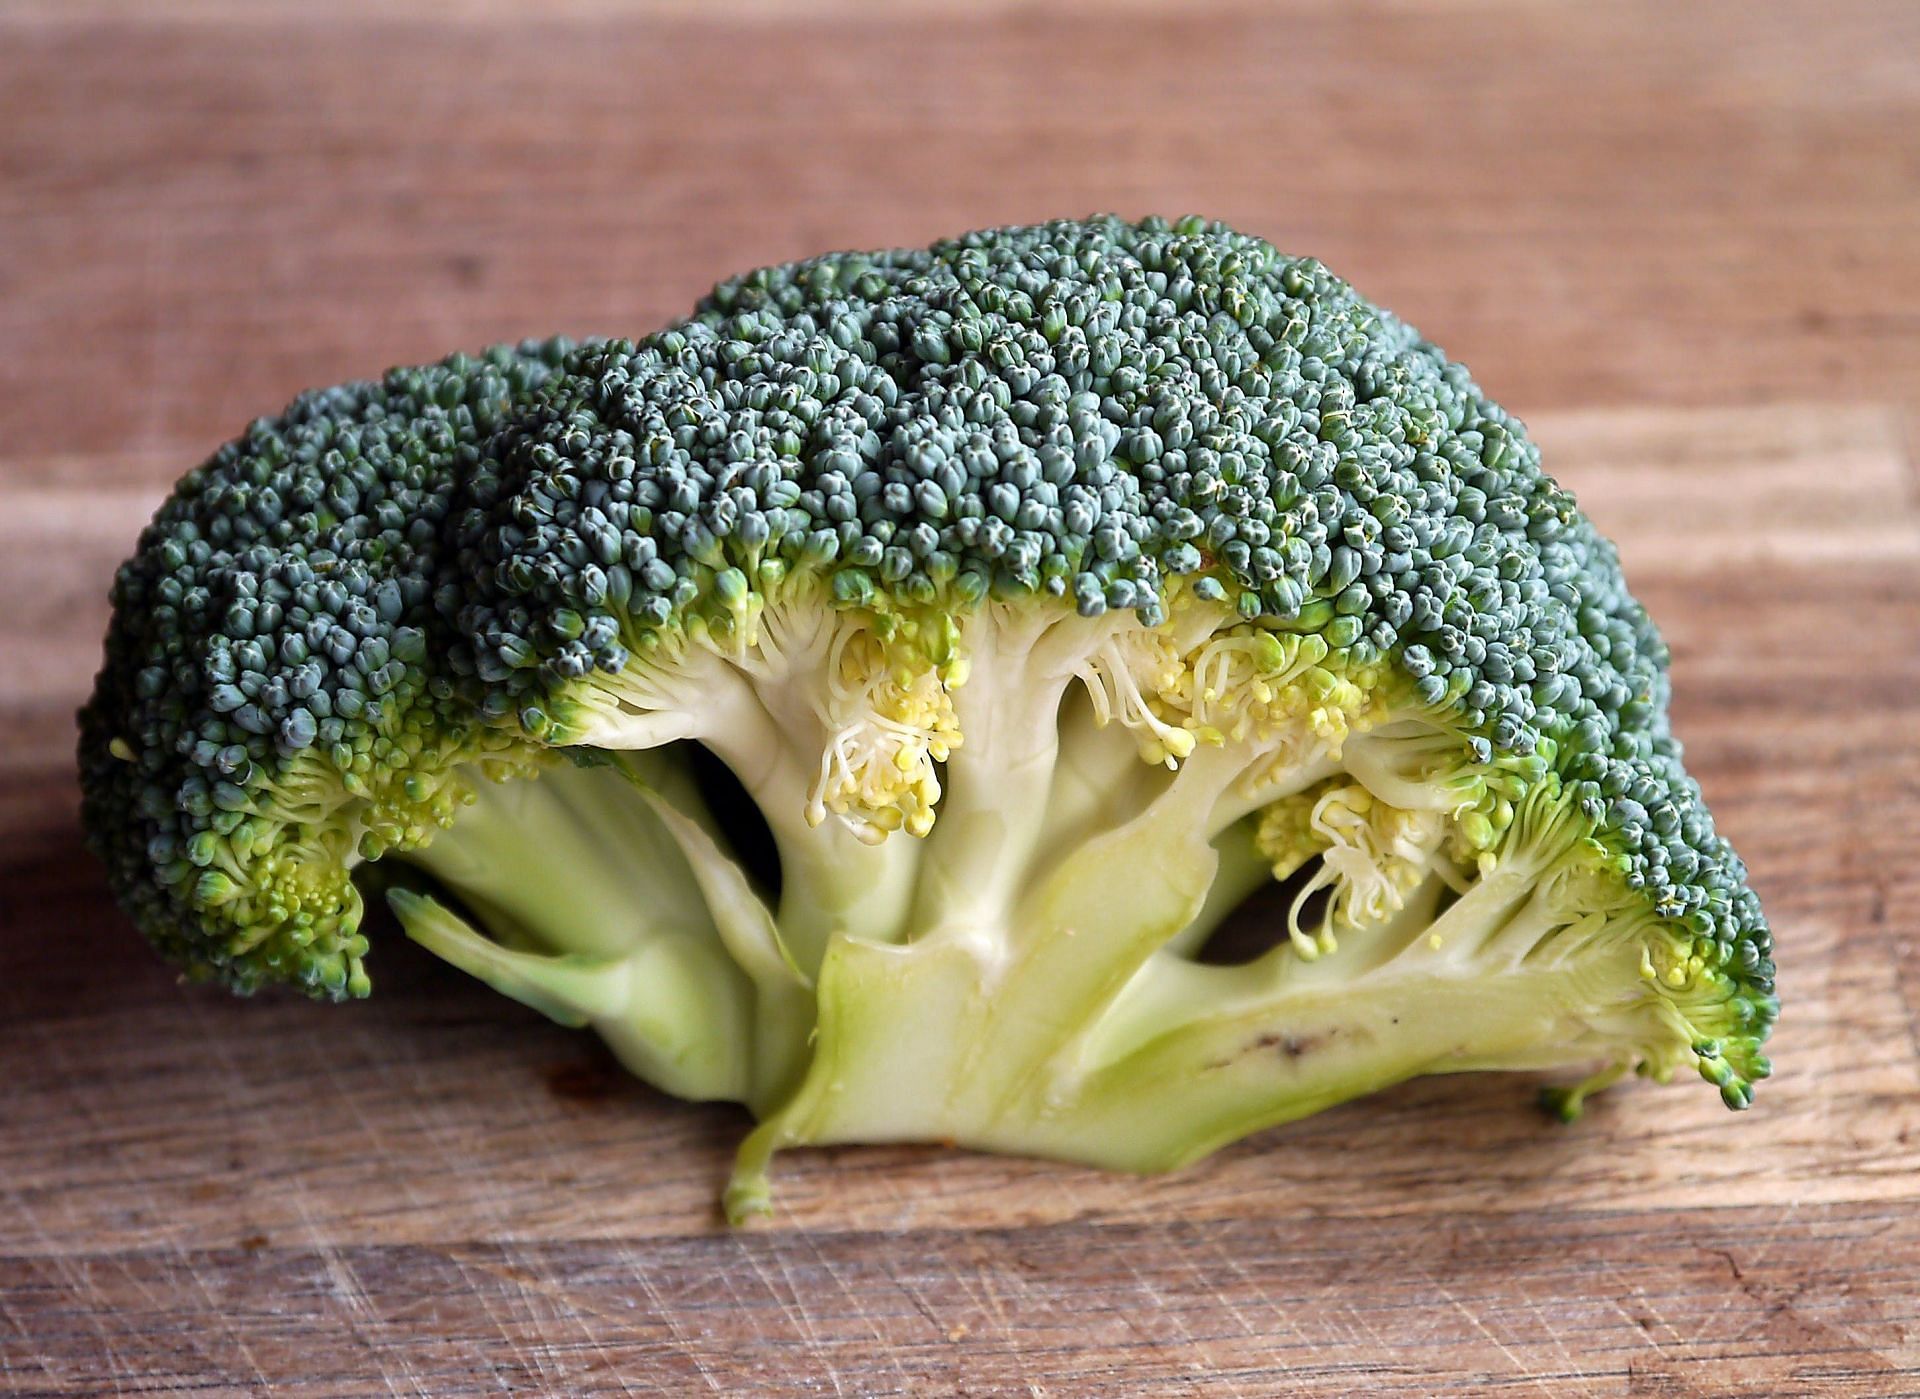 Broccoli as food to stimulate the brain (Image sourced via Pexels / Photo by pixabay)